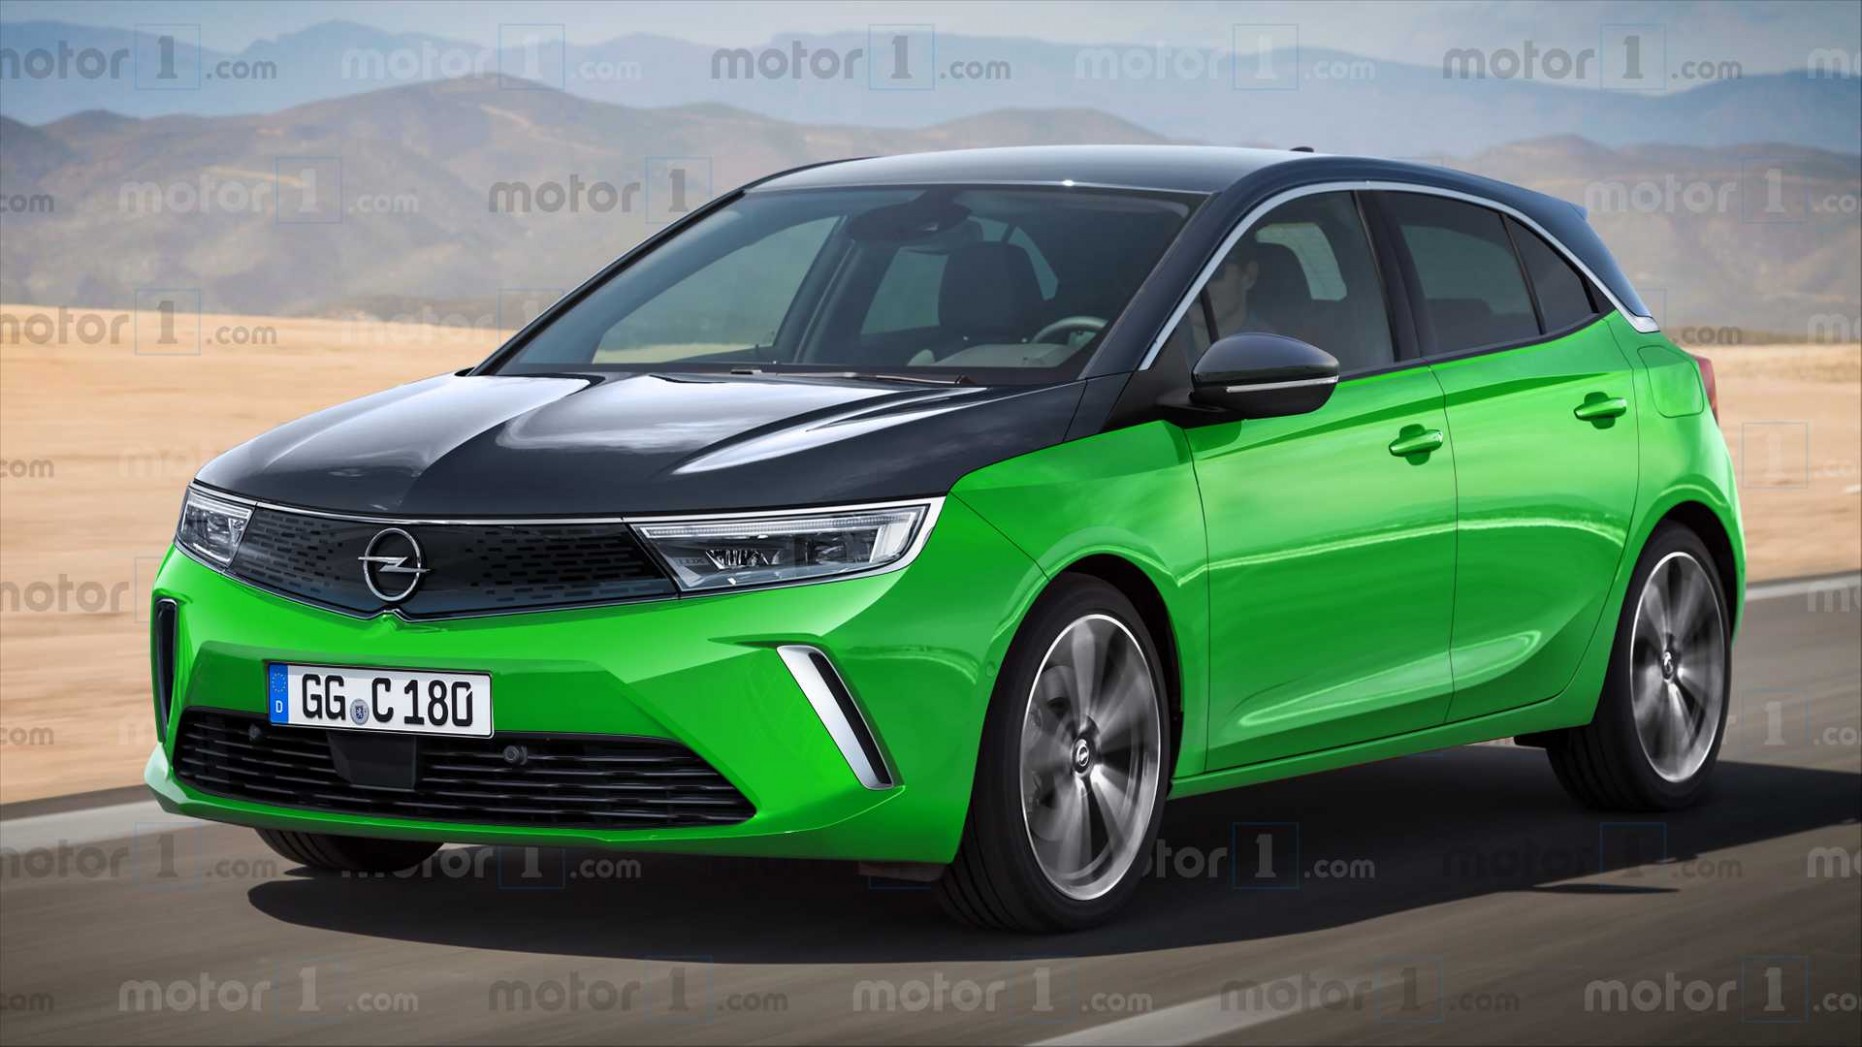 Opel Astra OPC Hot Hybrid Hatch Planned With Nearly 4 HP: Report - Opel Astra Opc 2021